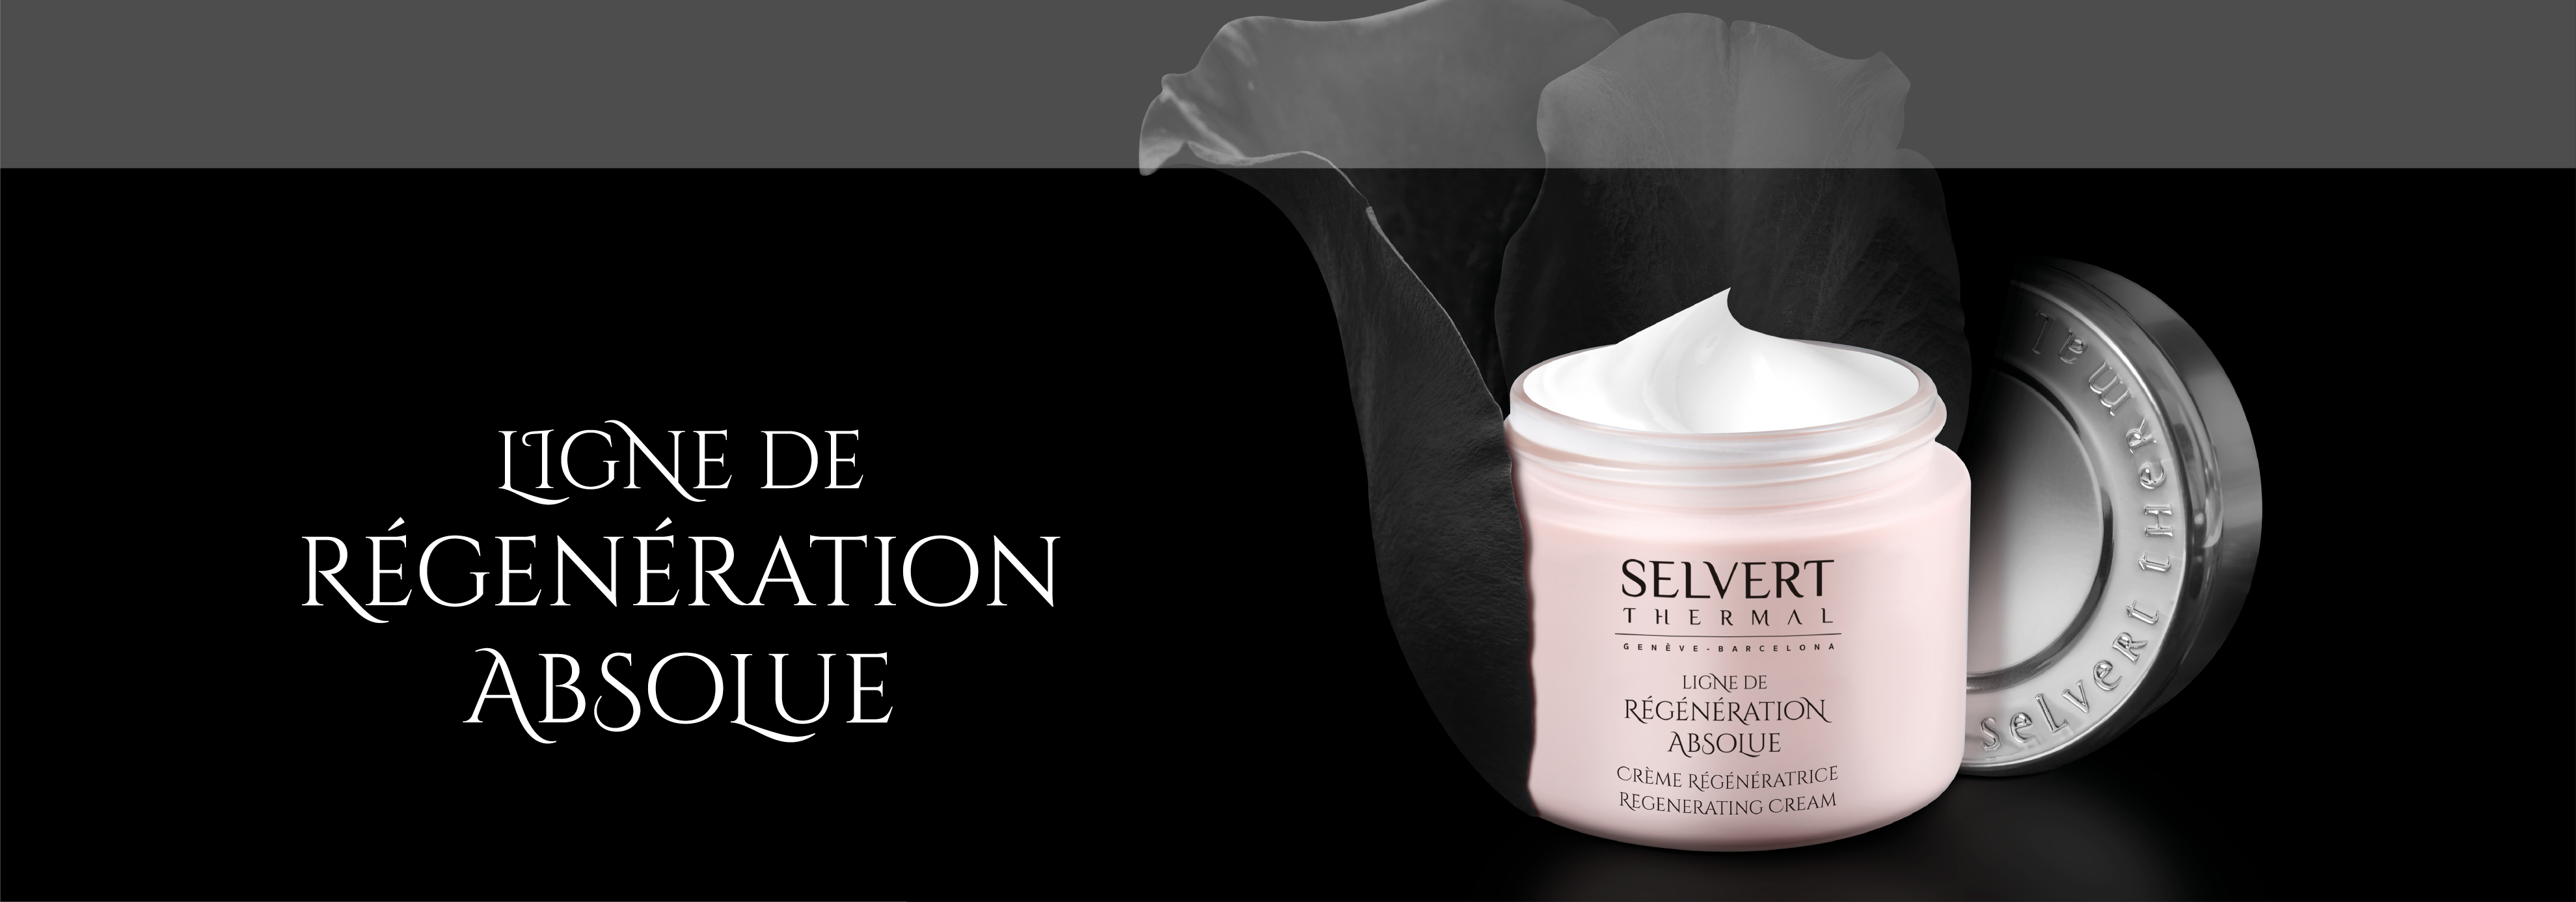 LIGNE DE REGENERATION ABSOLUE <h4 style="text-align: center;">REVIVRE VOTRE PEAU</h4>
<p style="text-align: justify;">&nbsp;</p>
<p style="text-align: justify;">Over time, skin loses its ability for self-regeneration. When the decohesion process and desquamation in the stratum corneum are not properly carried out, the epidermis becomes compact and the skin is left looking grey, tired and pallid.</p>
<p style="text-align: justify;">Once again Selvert Thermal, thanks to its Ligne Reg&eacute;n&eacute;ration Absolue and its advanced combination of active ingredients such as ProRenew Complex &reg; and Snail Protein Extract, has succeeded in providing a solution to the most demanding skin types and mature skins. These skin types regenerate at a slower pace or have undergone various medical and aesthetic treatments which have caused them to become sensitive and in need of comfort and regeneration.</p>